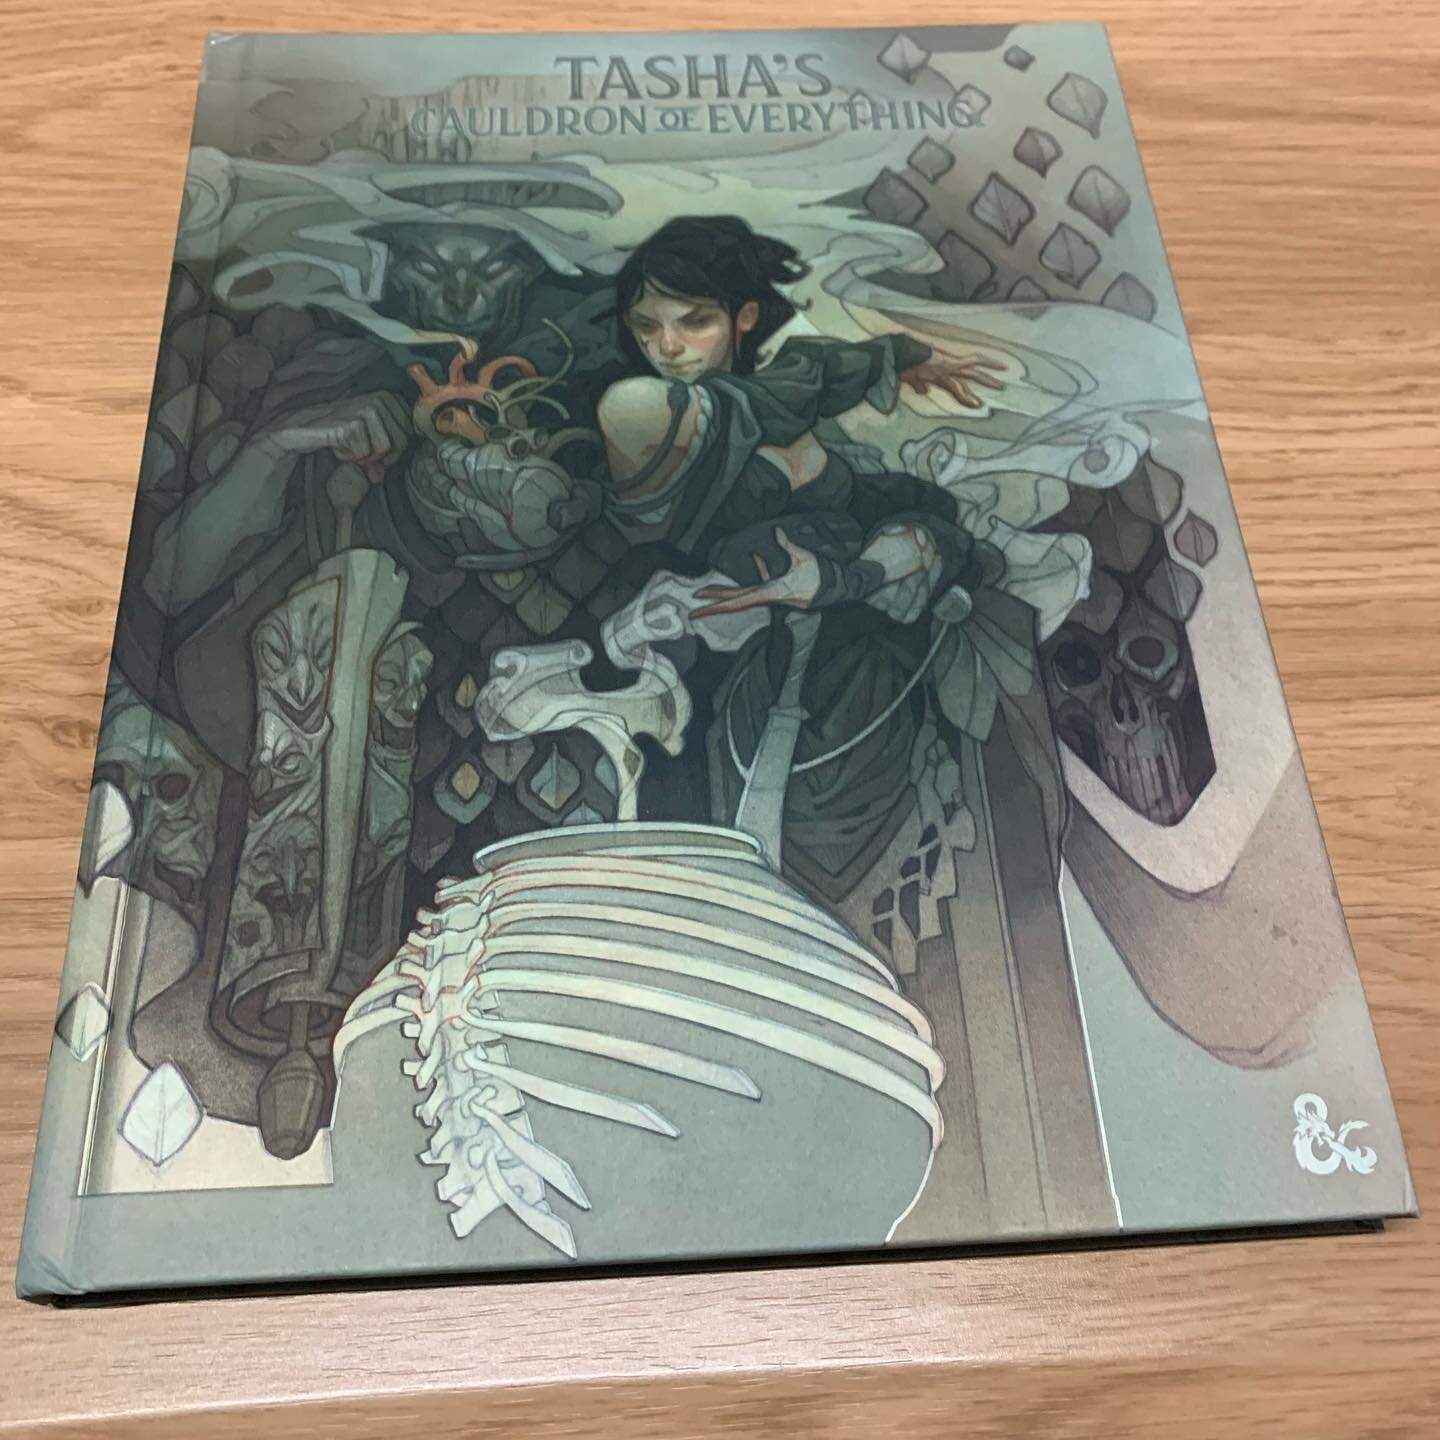 Popped over to @fanboythree to pick up my copy this morning. It&rsquo;s really important to support your FLGS during the lockdown, they provide so much for the community and it&rsquo;s only right that we make sure they are able to open once this terr